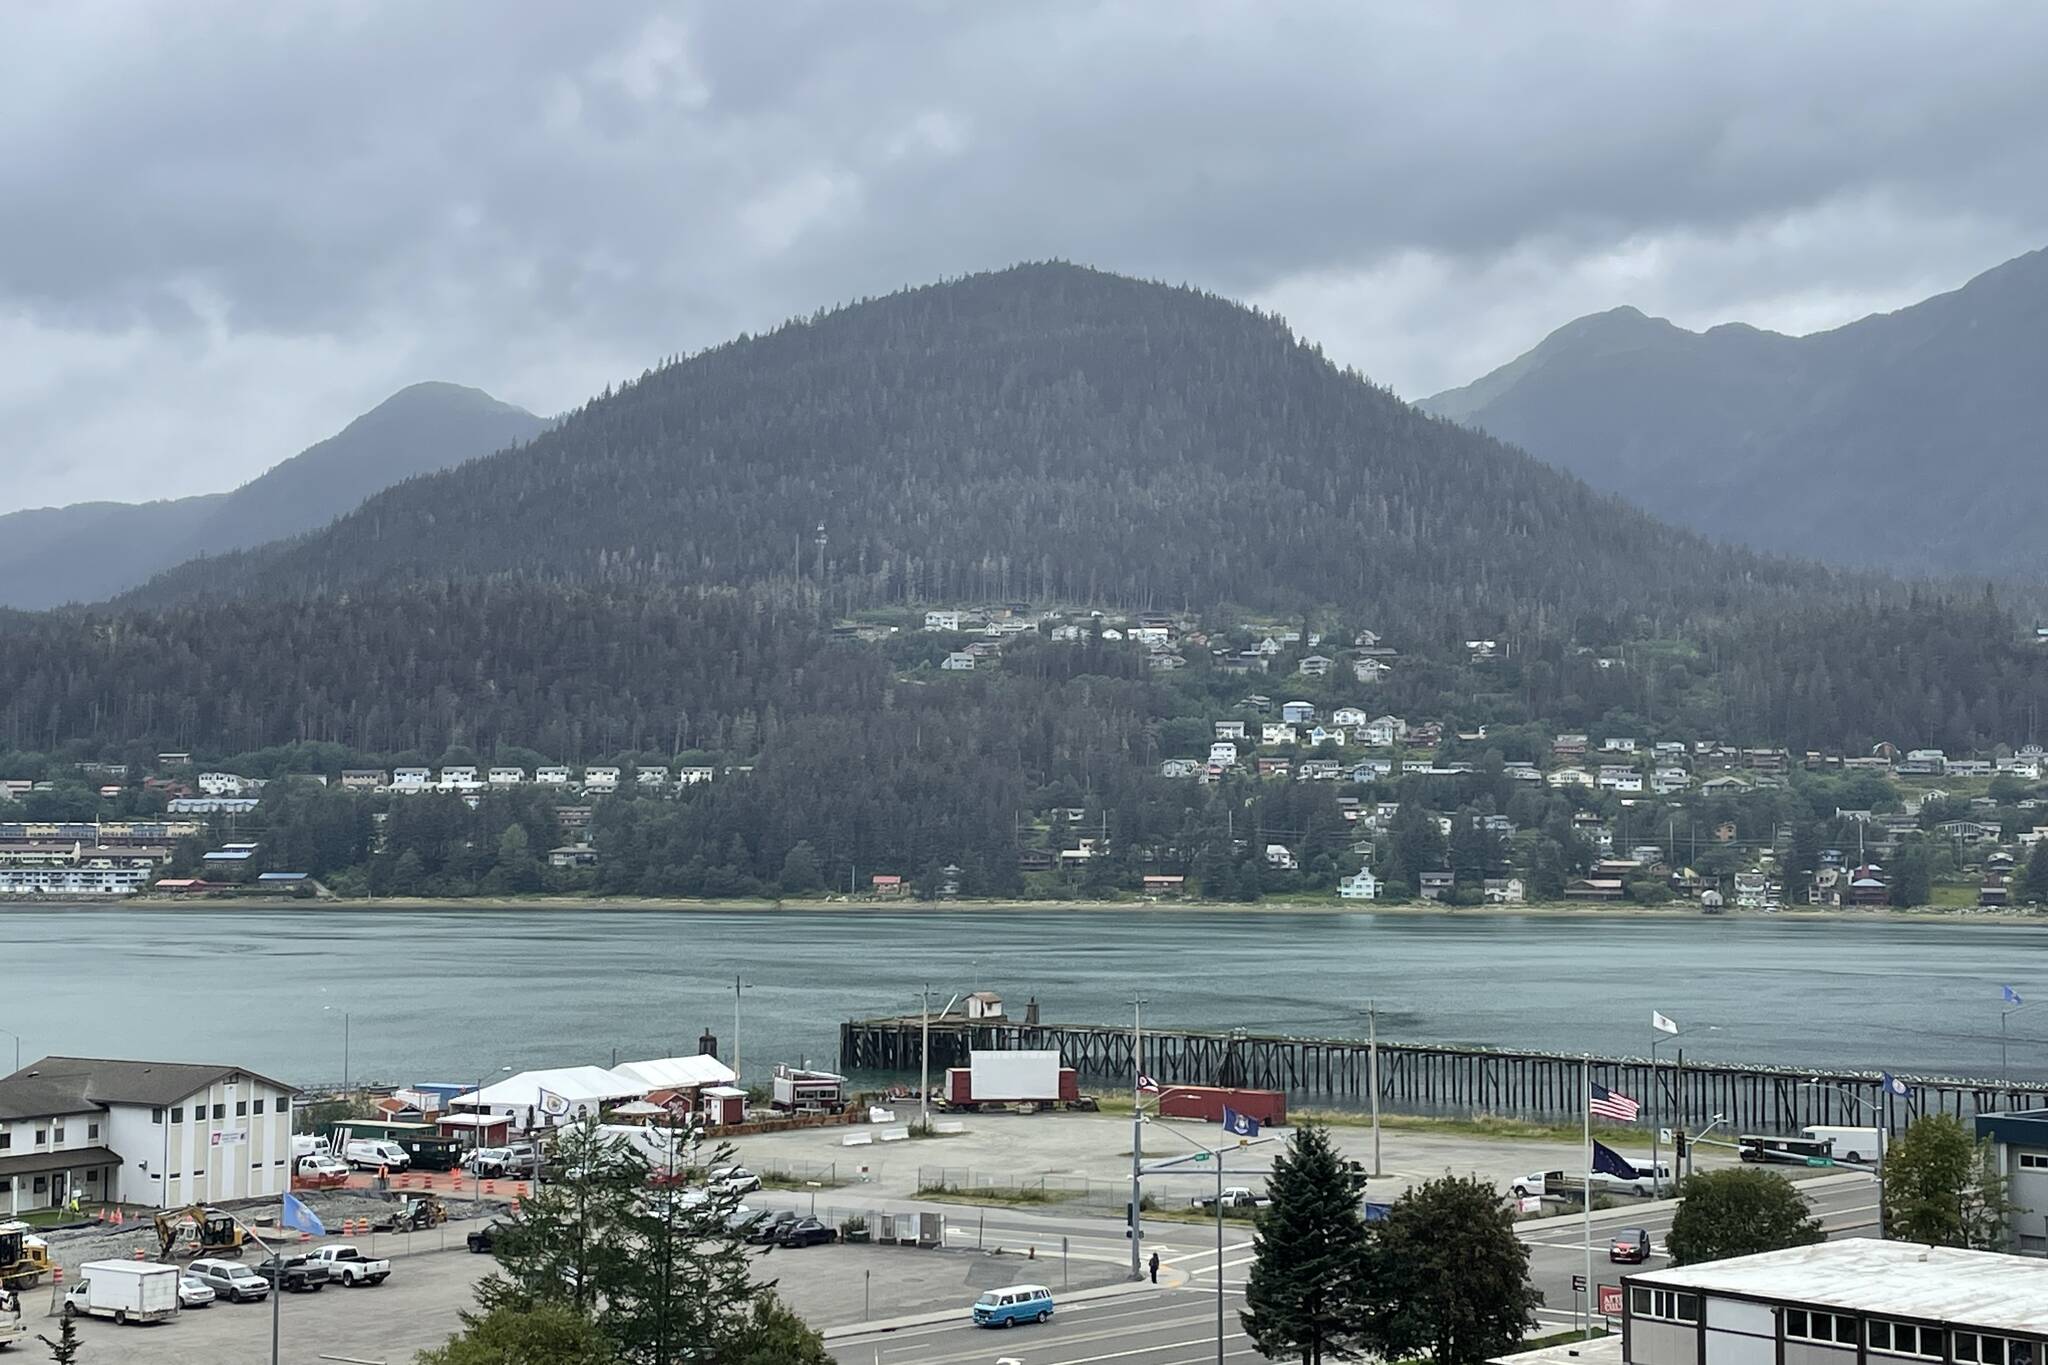 Norwegian Cruise Line announced Tuesday that it would donate a 2.9-acre plot of land owned by the cruise line since 2019 on Juneau’s harborfront to Huna Totem Corp. to develop. (Michael S. Lockett / Juneau Empire)